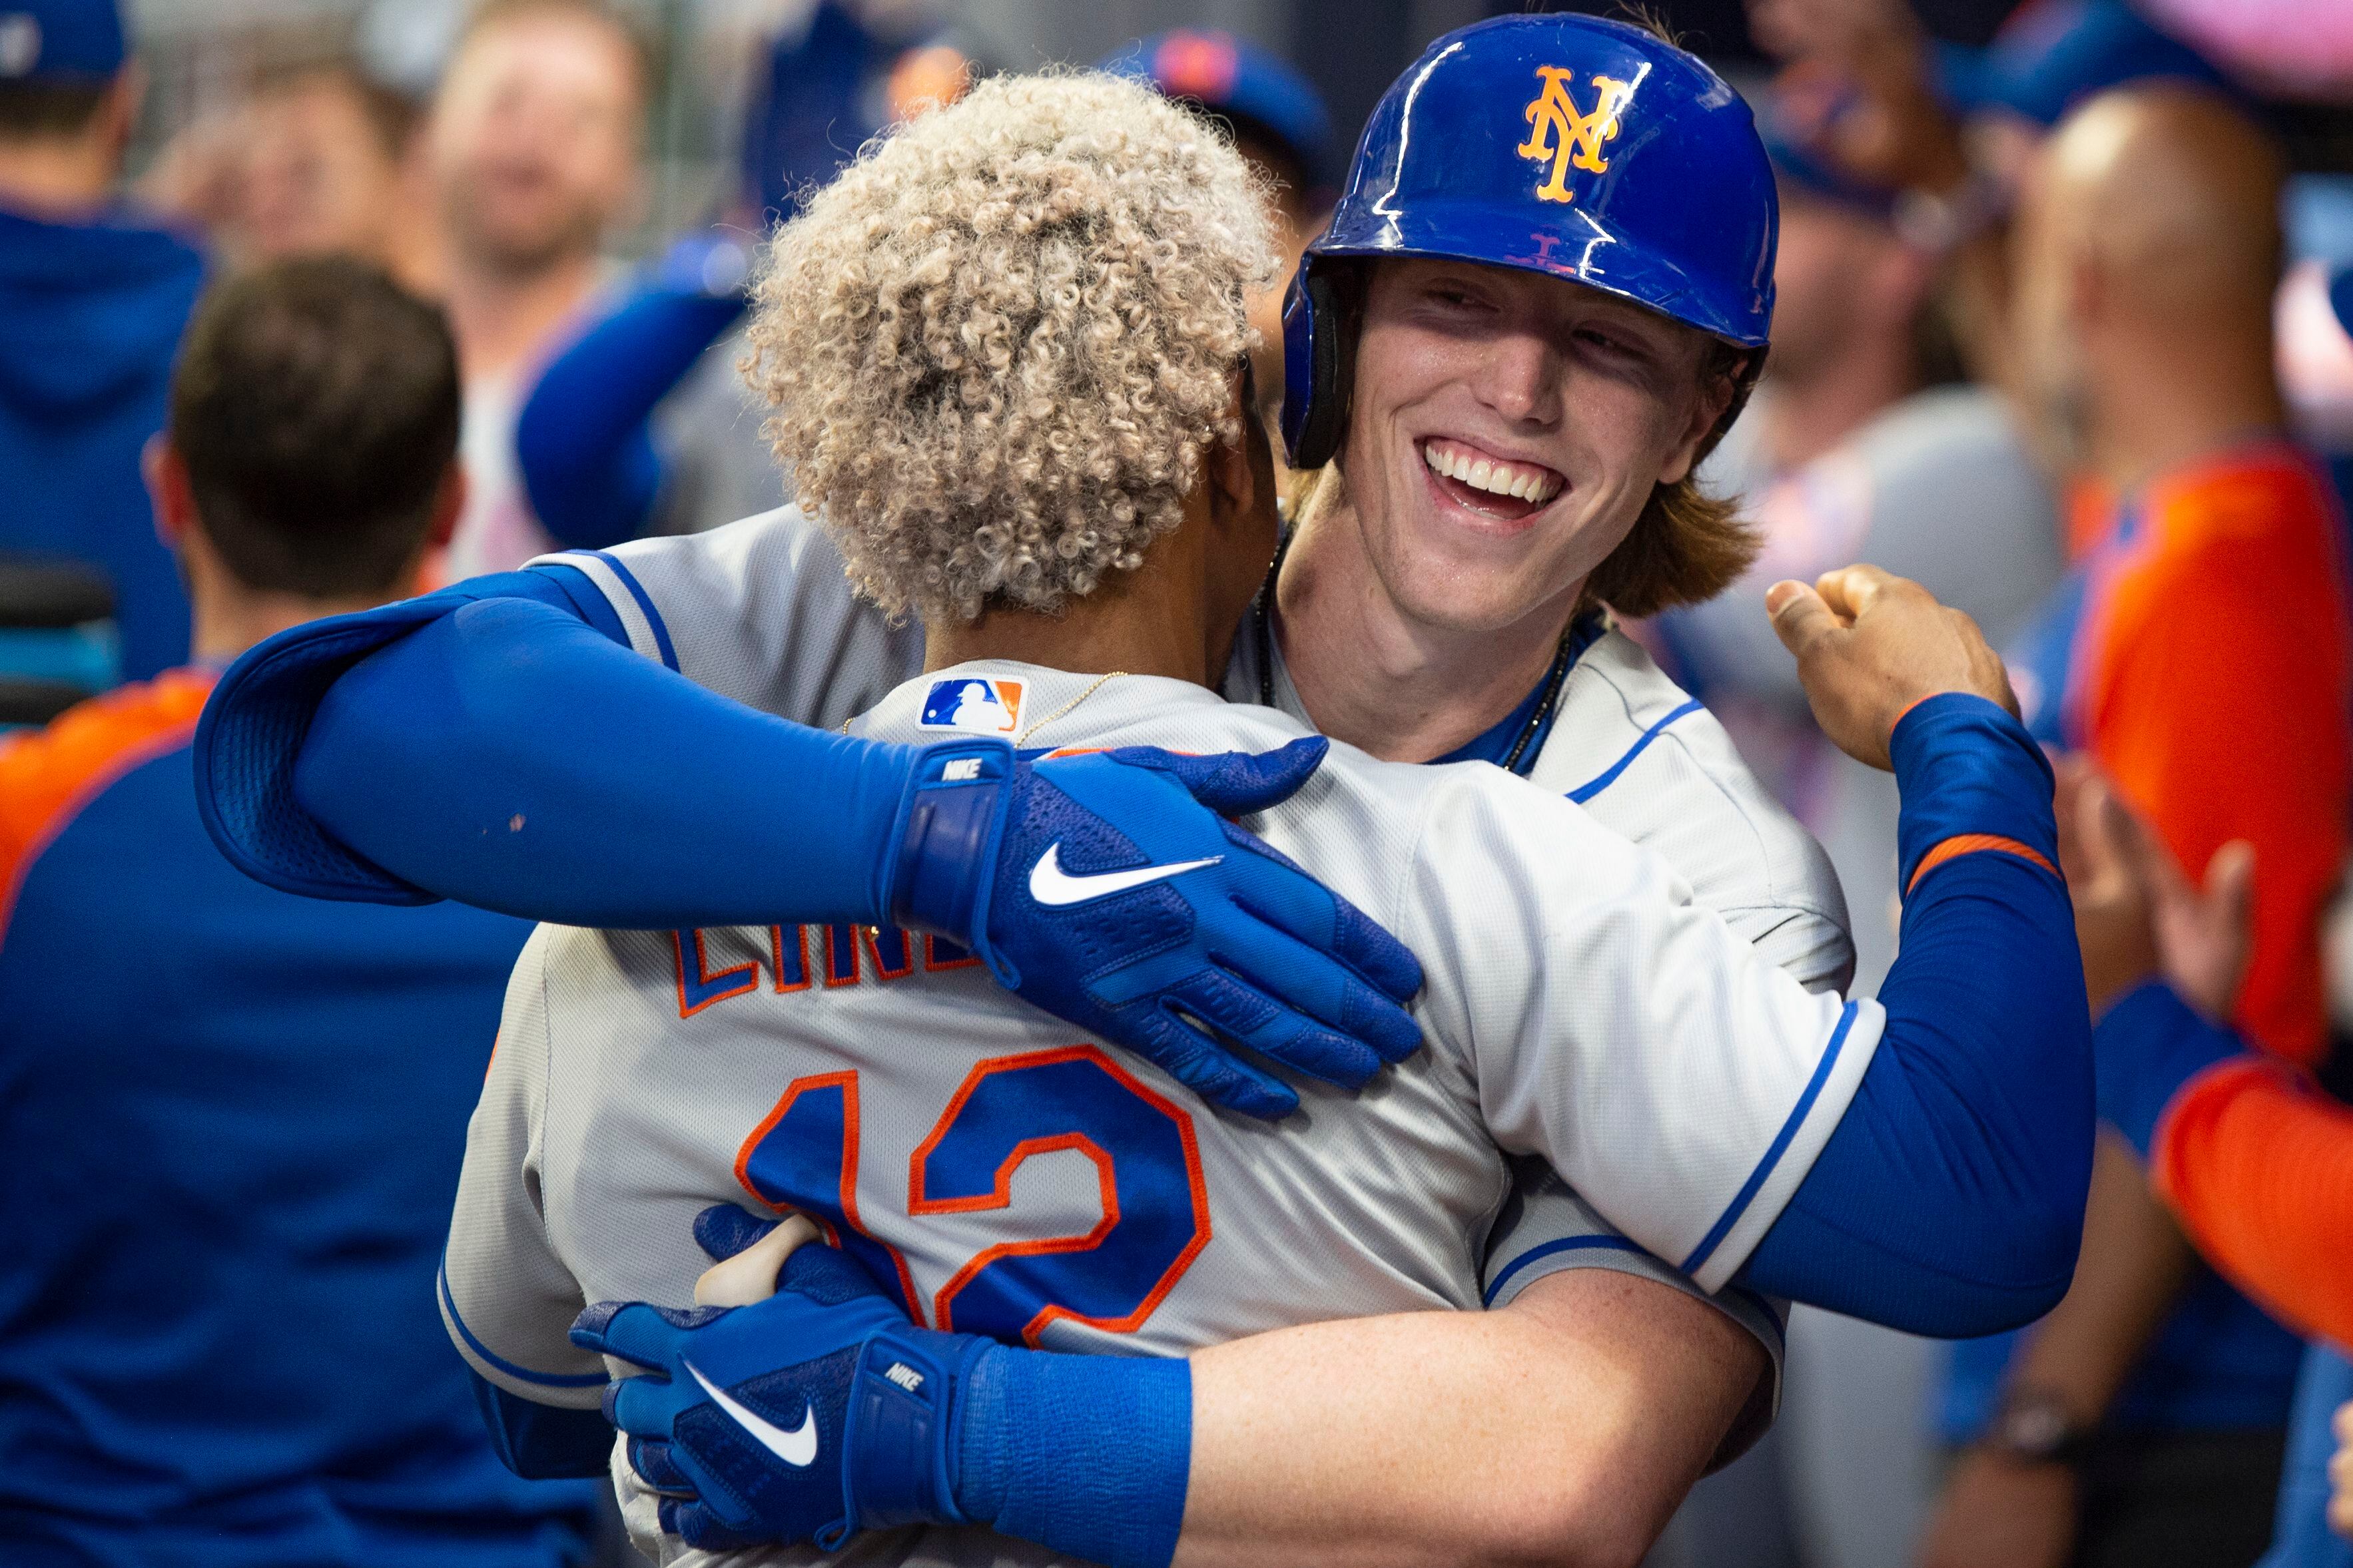 Baty homers first time up in majors, Mets beat Braves 9-7